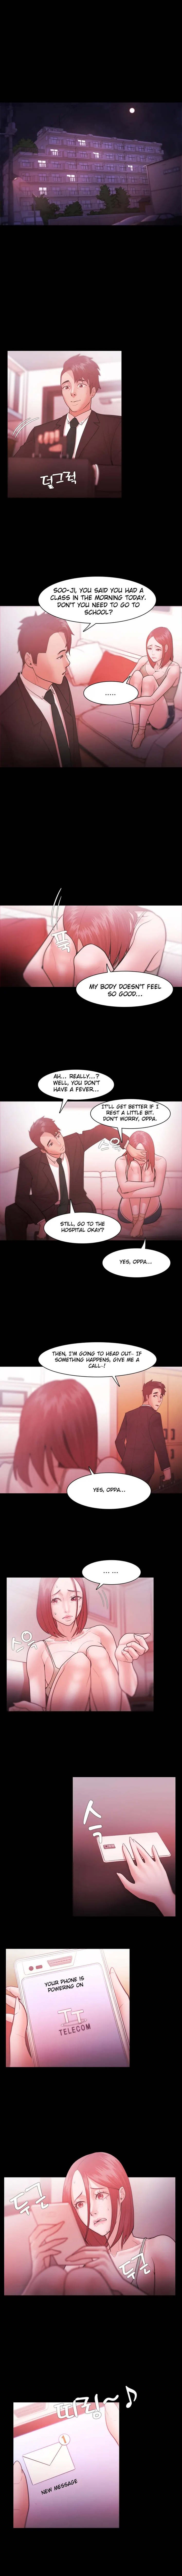 Loser (Team 201) - Chapter 28 Page 5